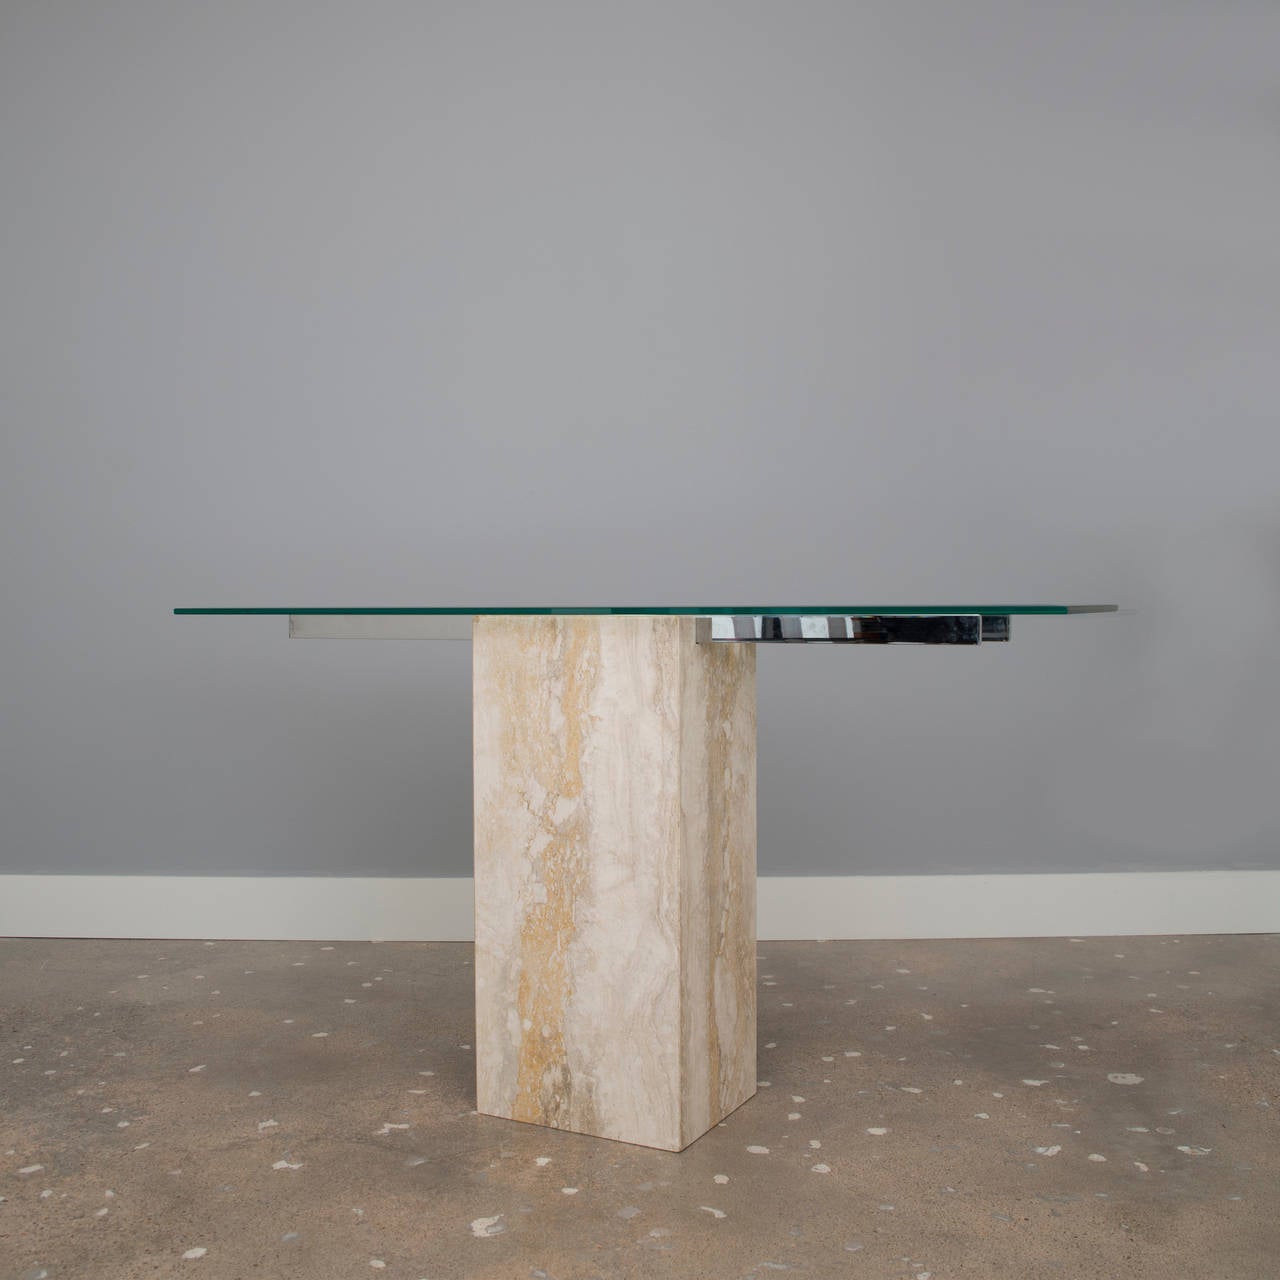 This elegant console table by Ello has a base of Italian travertine marble and a pair of nickel-plated arms which supports a glass top. Sleek and Minimalist.